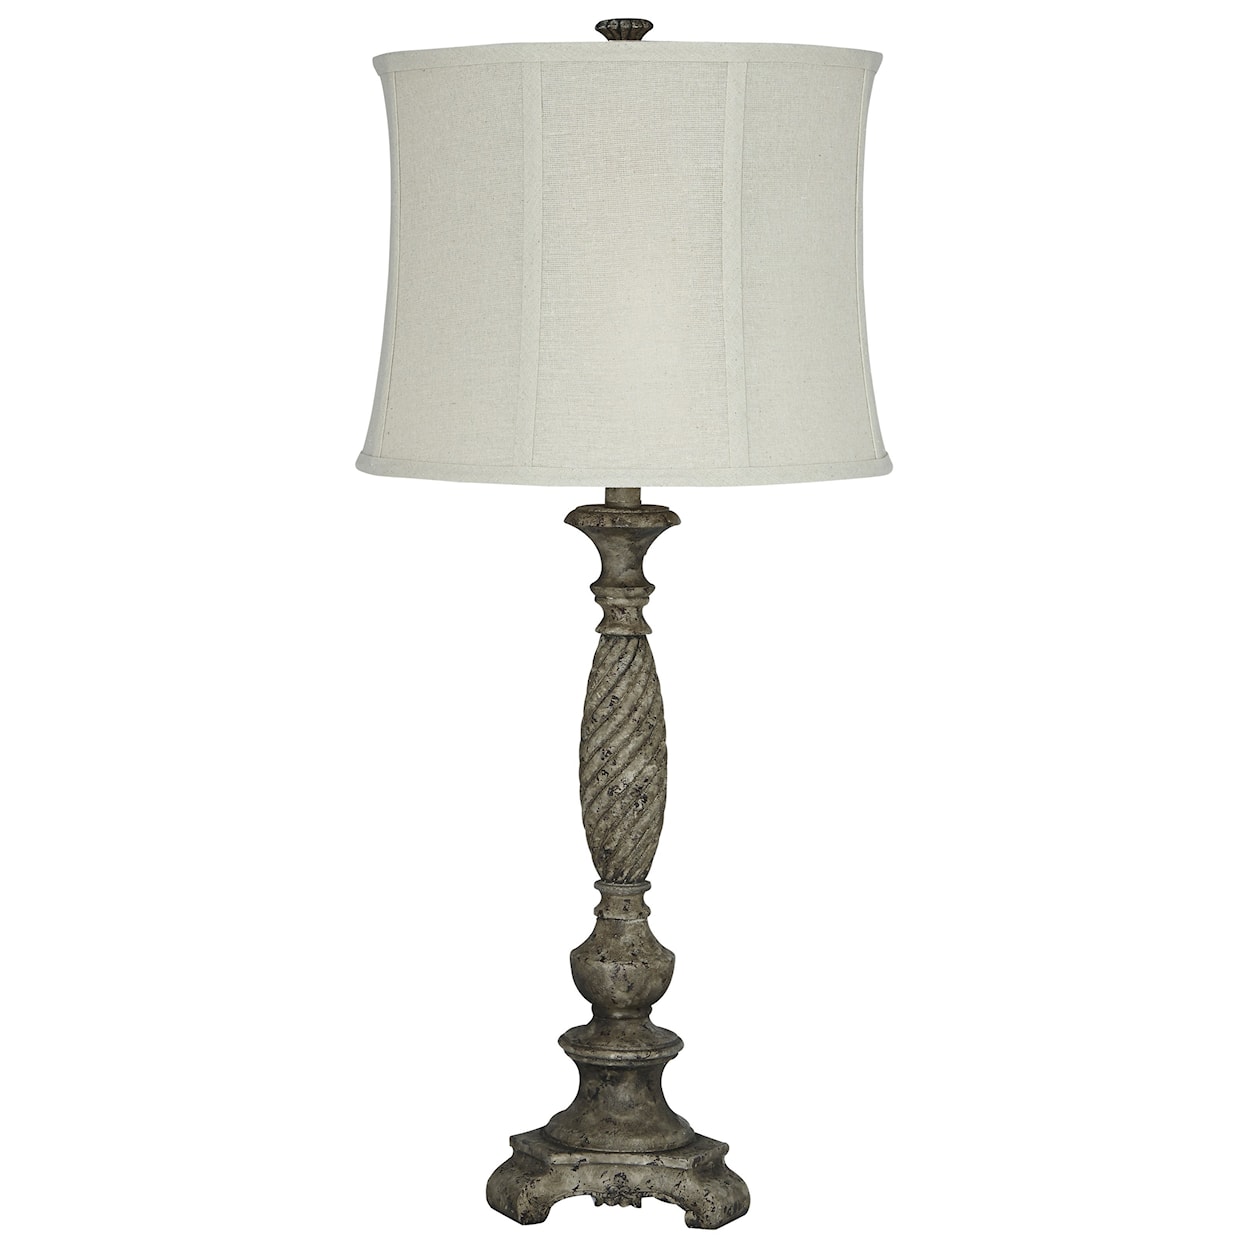 Signature Design by Ashley Lamps - Traditional Classics Alinae Poly Table Lamp